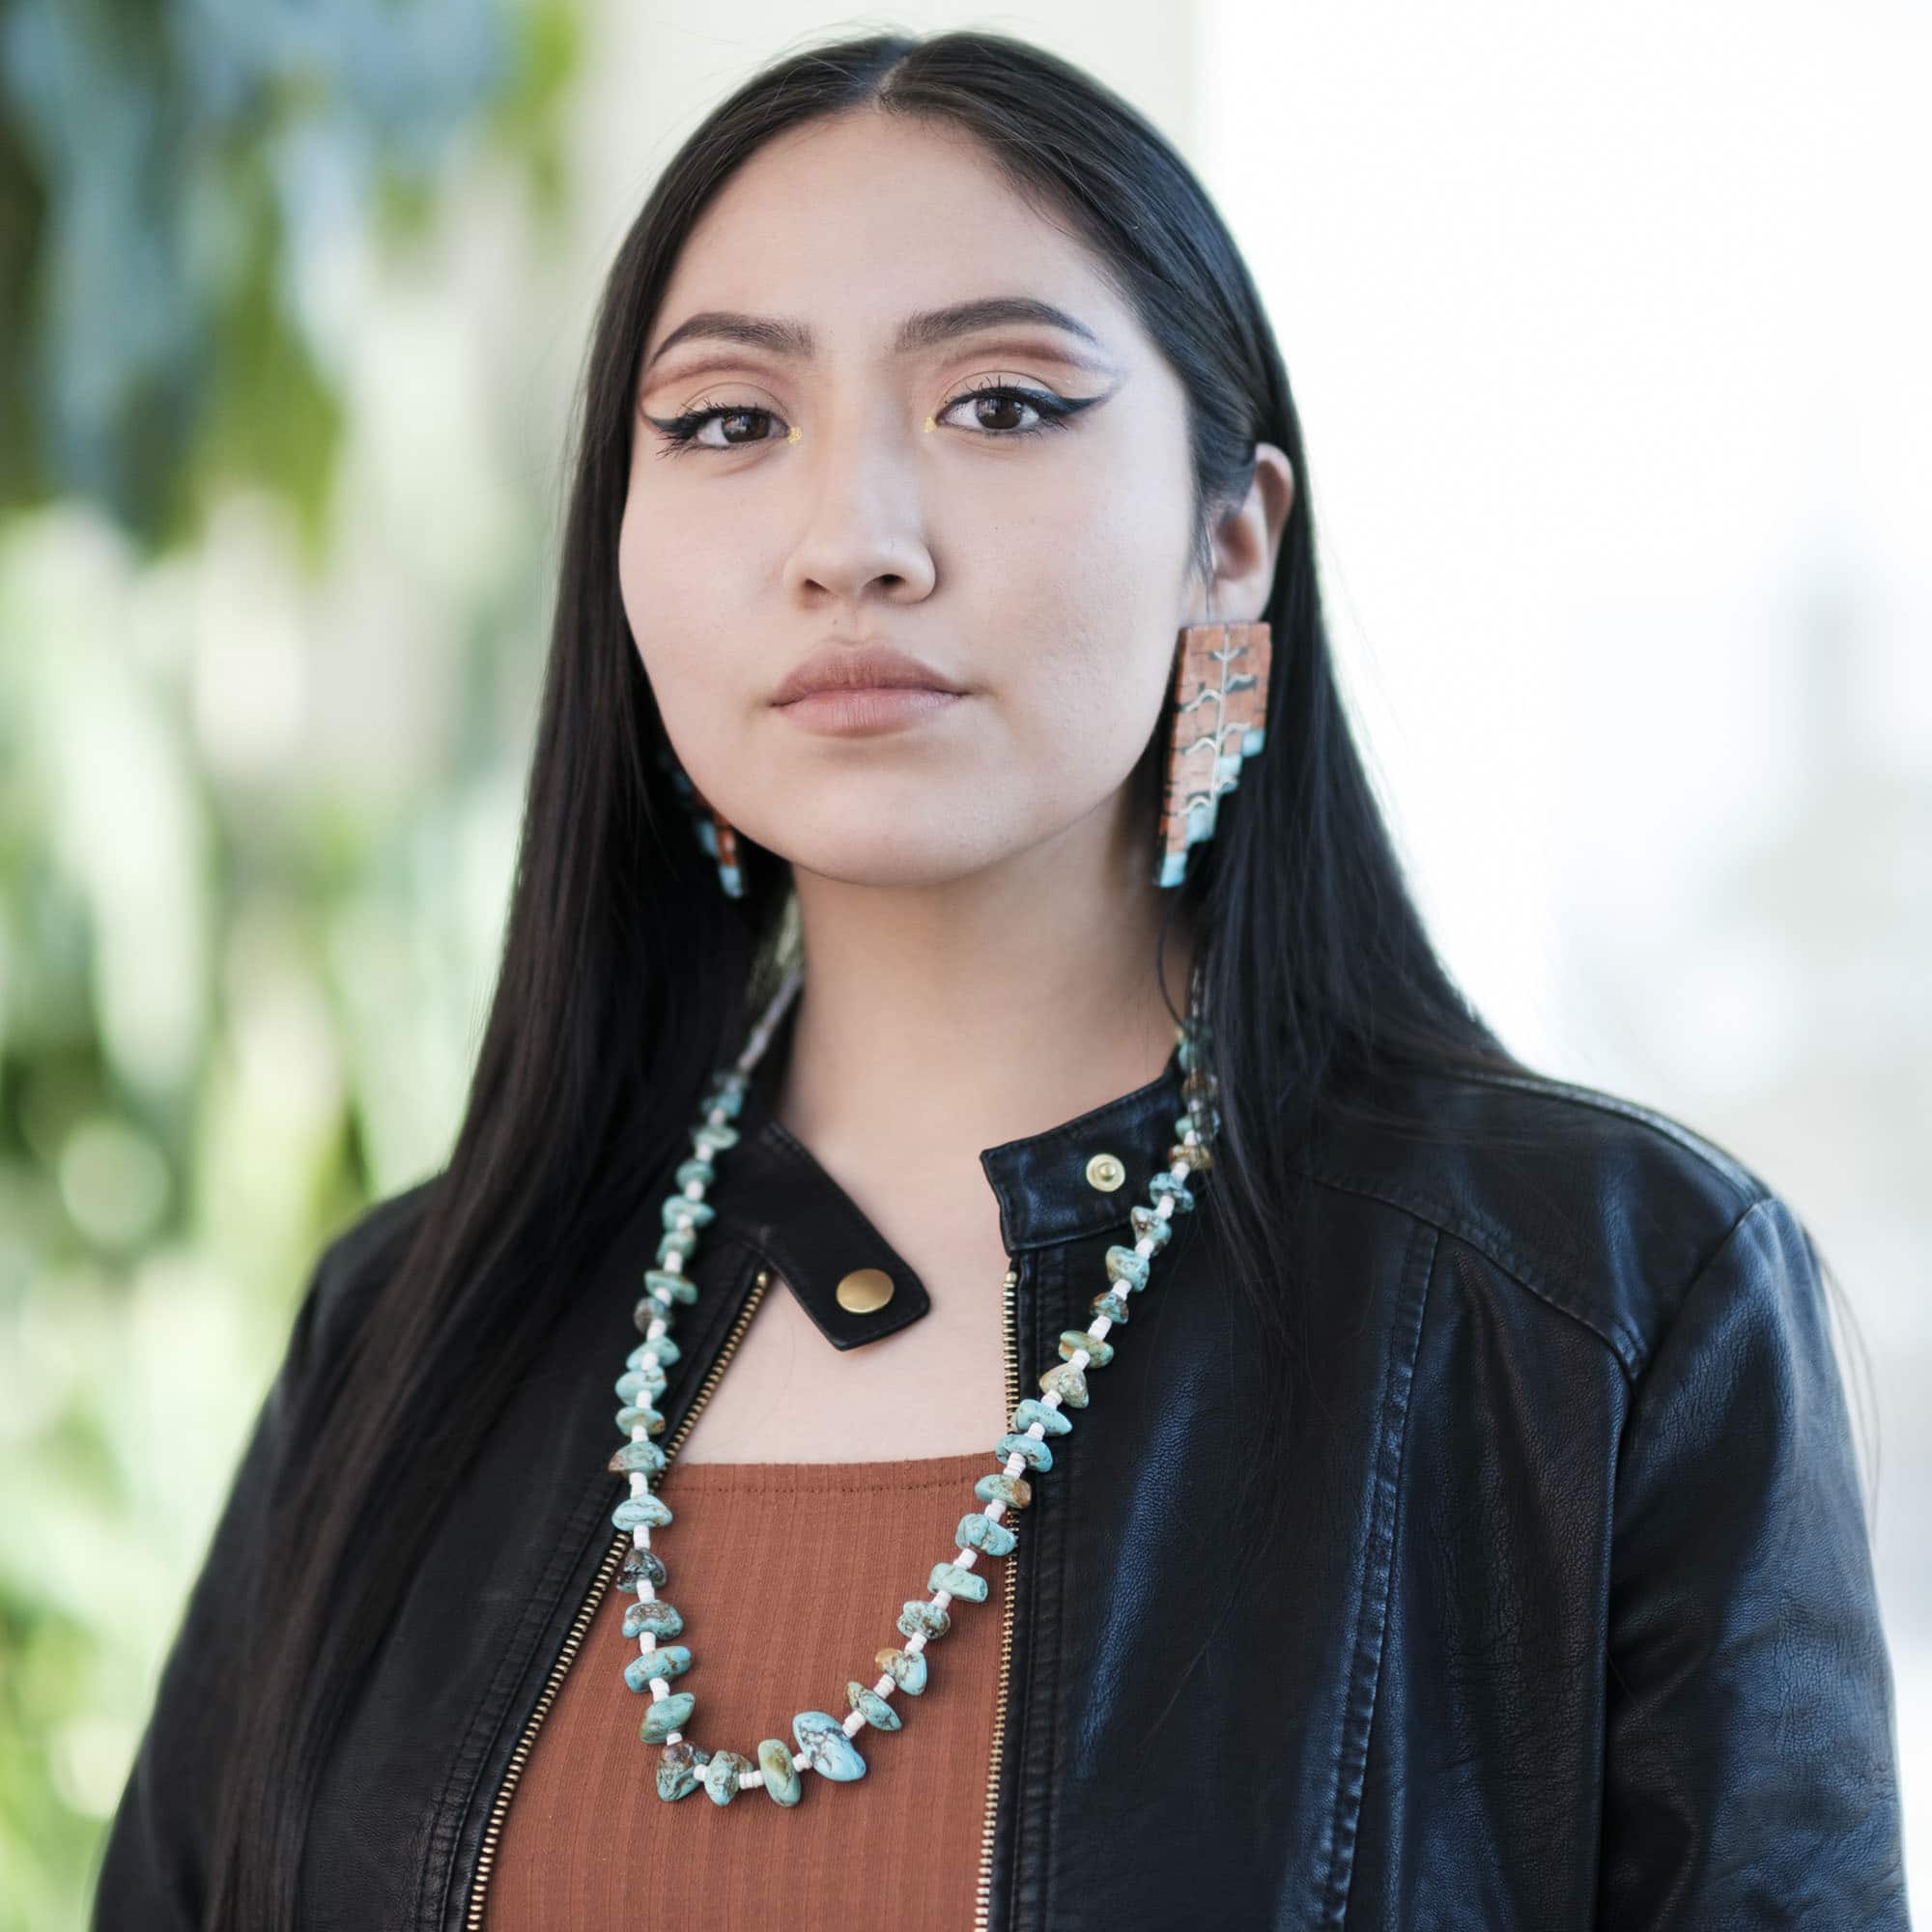 Jacquelyn Yepa Selected as the 2022 IAIA Student of the Year